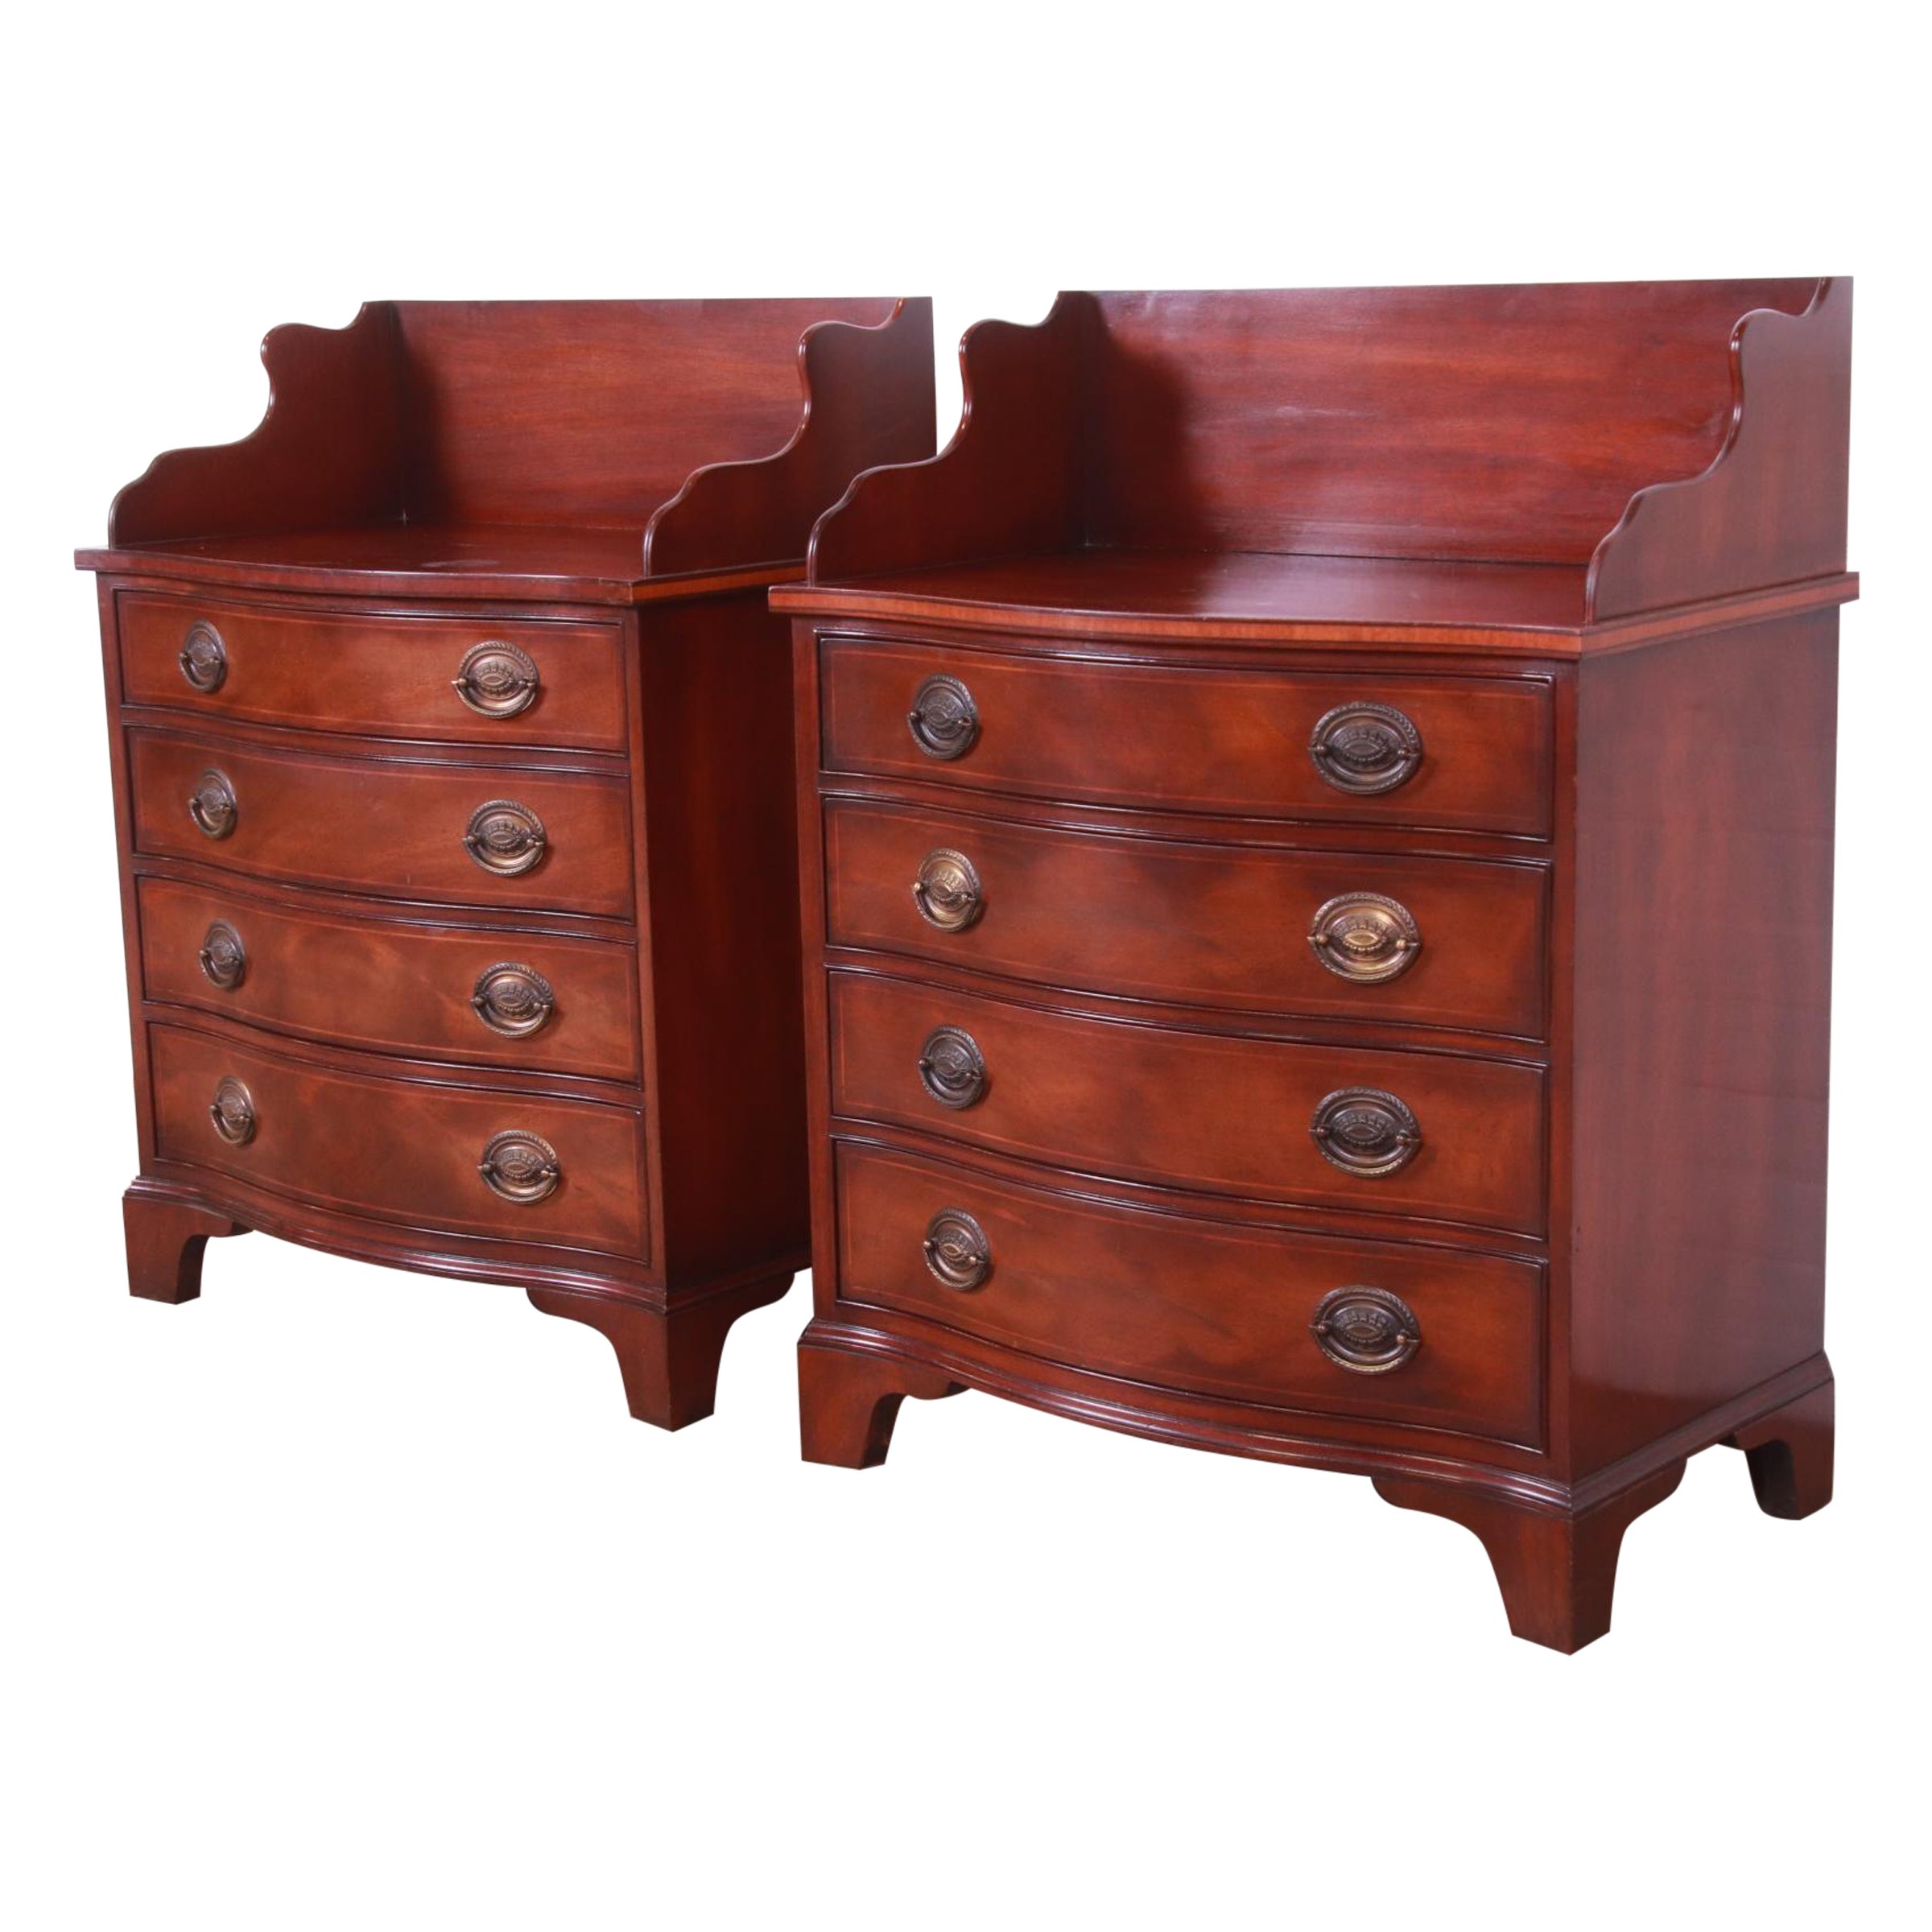 Henredon Georgian Inlaid Mahogany Serpentine Bachelor Chests or Nightstands For Sale